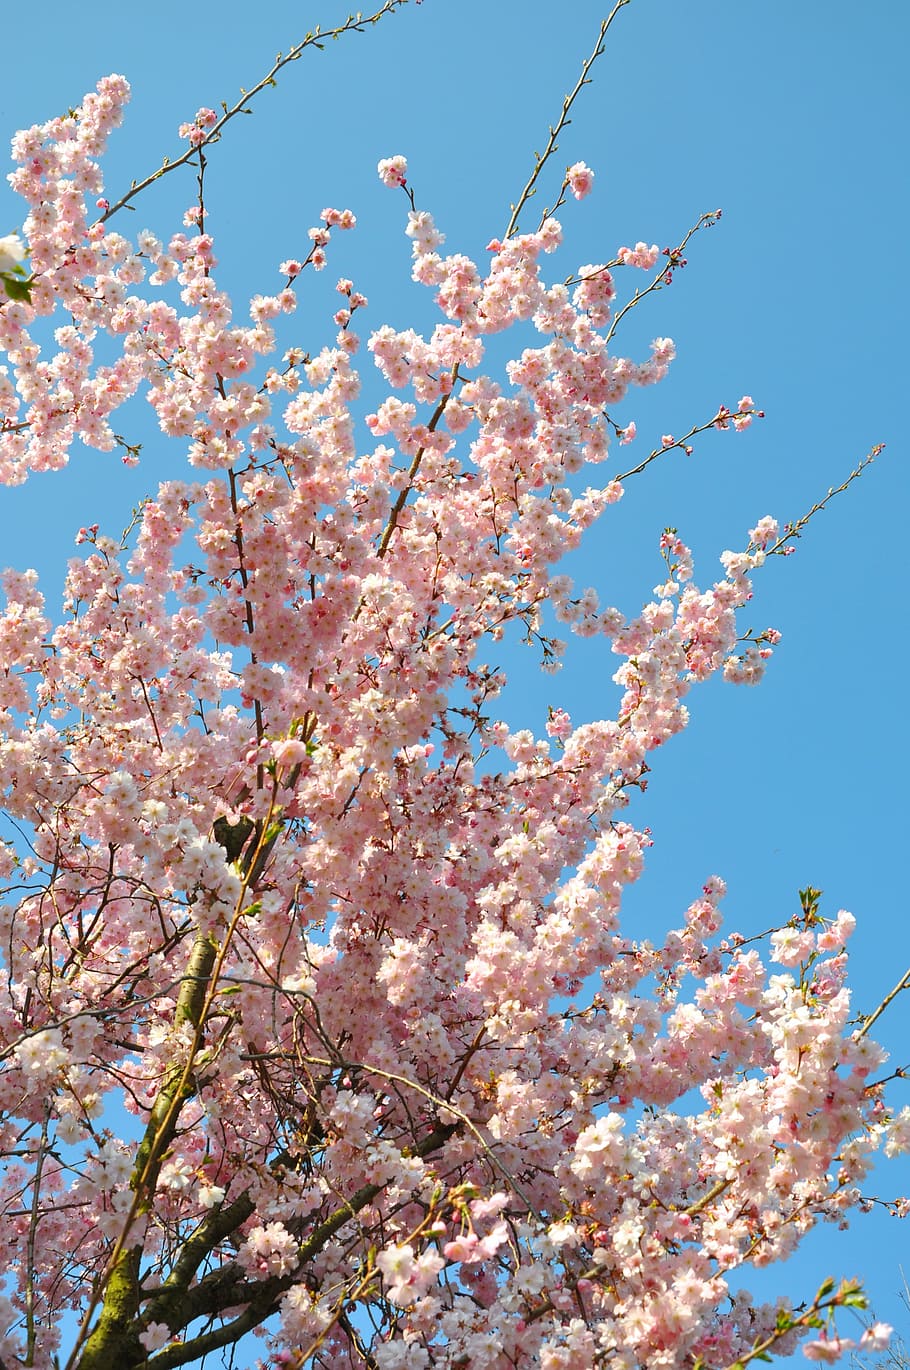 A tree with pink flowers and leaves - Cherry blossom